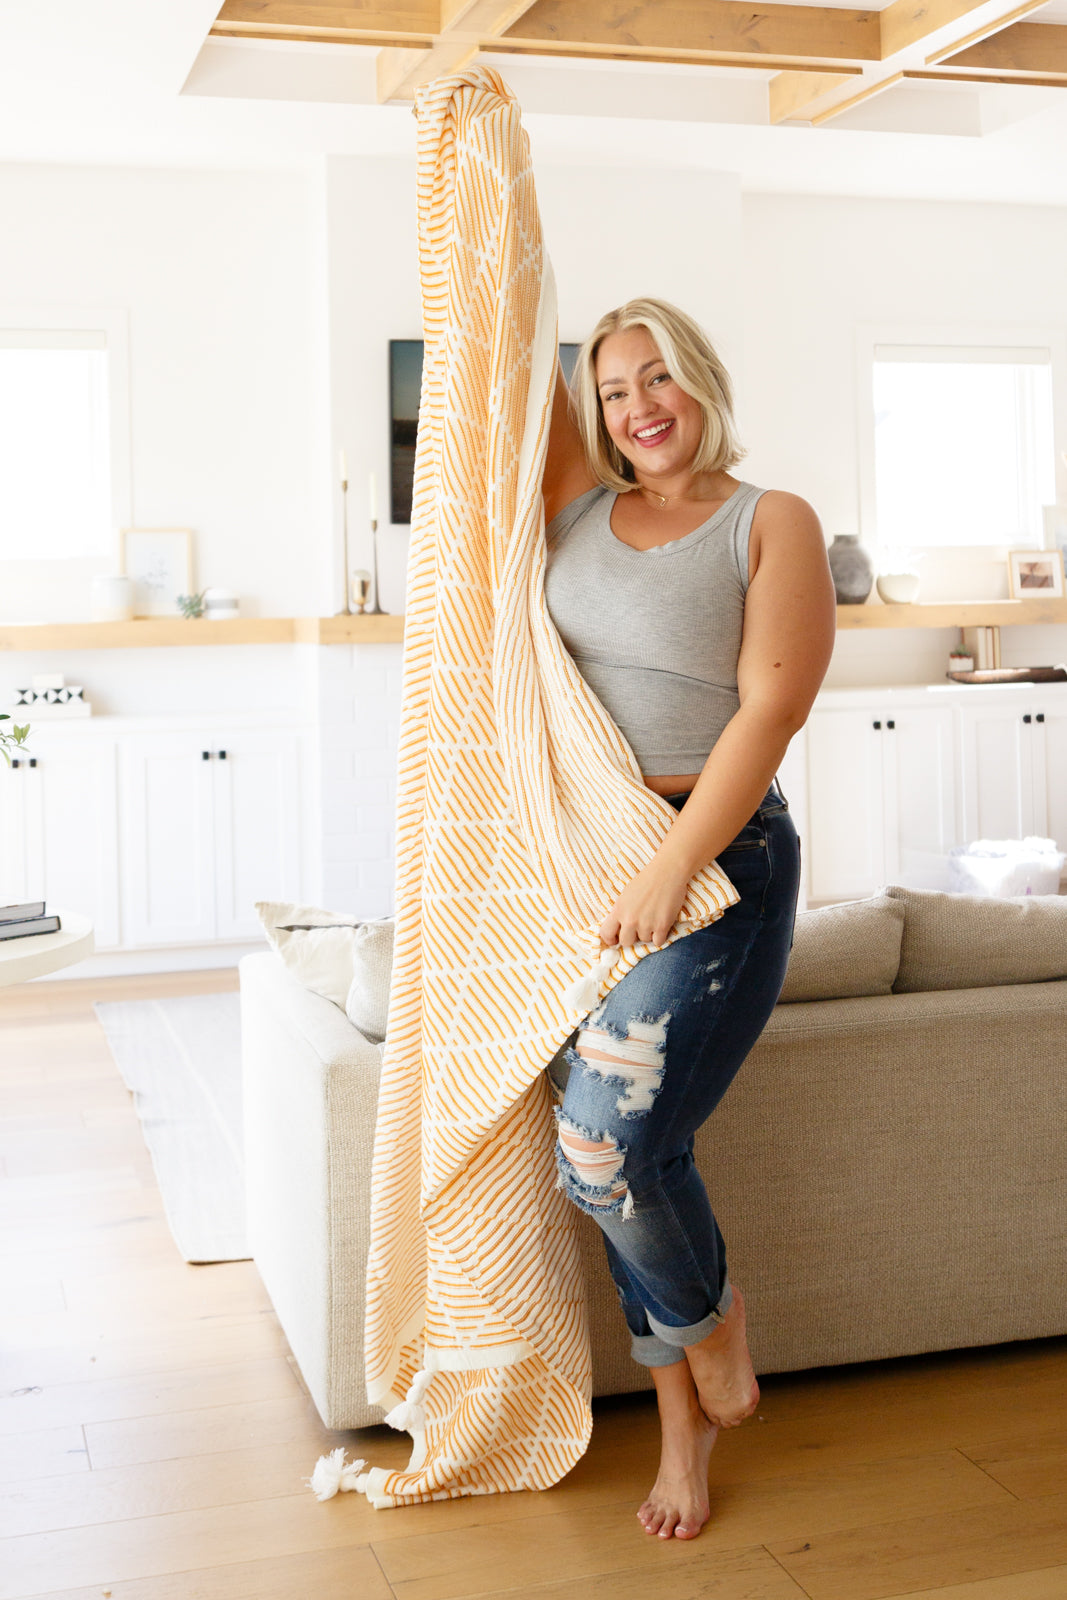 Elevate your home decor this fall with these soft and trendy tassel blankets from Cuddle Culture! Available in a yellow and white stripe texture with a stunning geometric design and tassel accent on all four corners.